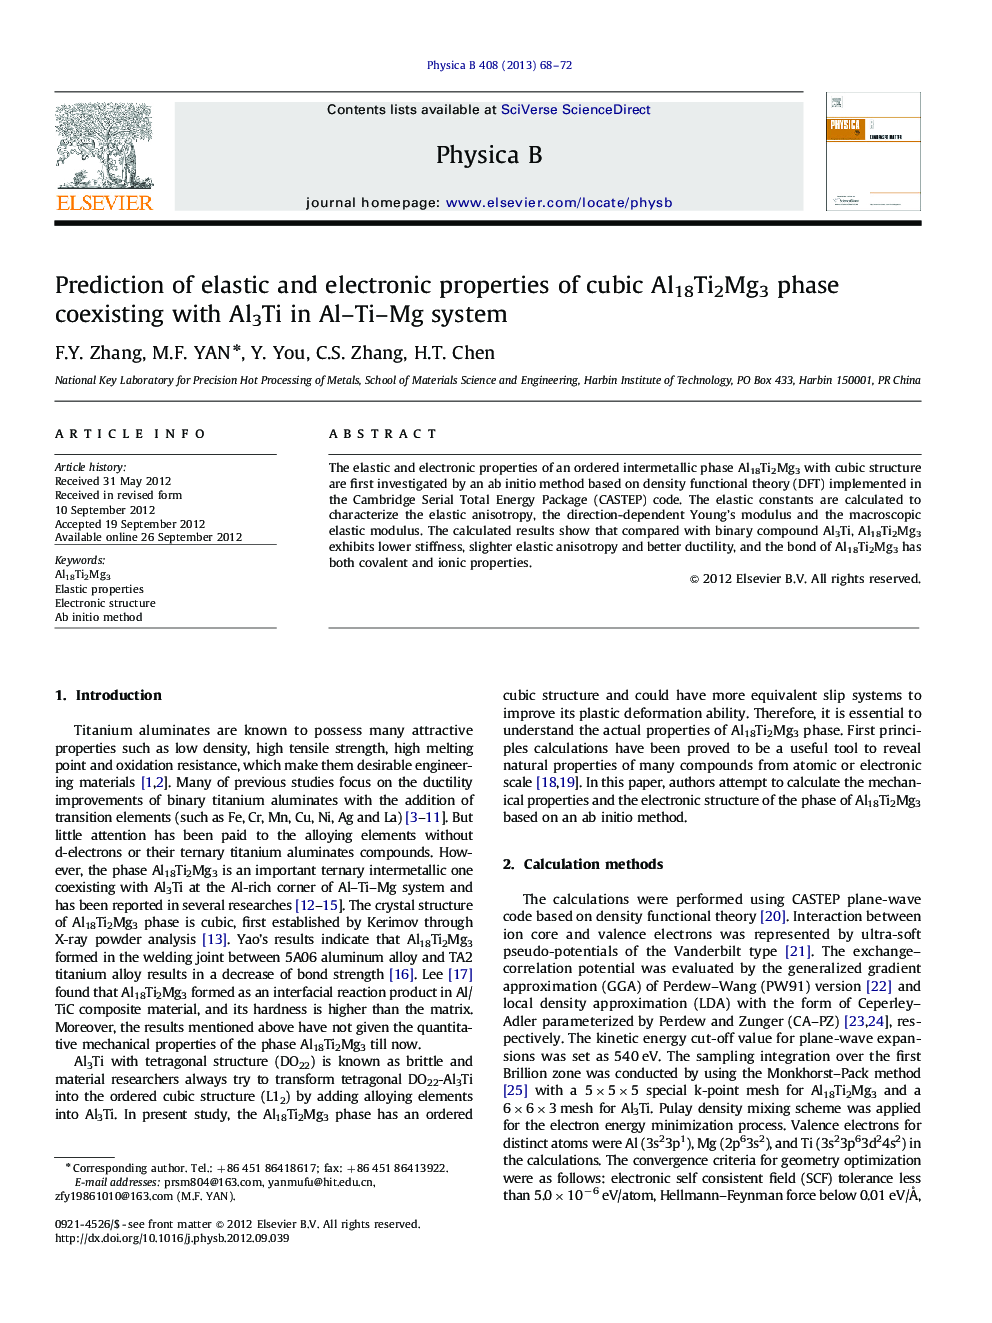 Prediction of elastic and electronic properties of cubic Al18Ti2Mg3 phase coexisting with Al3Ti in Al–Ti–Mg system